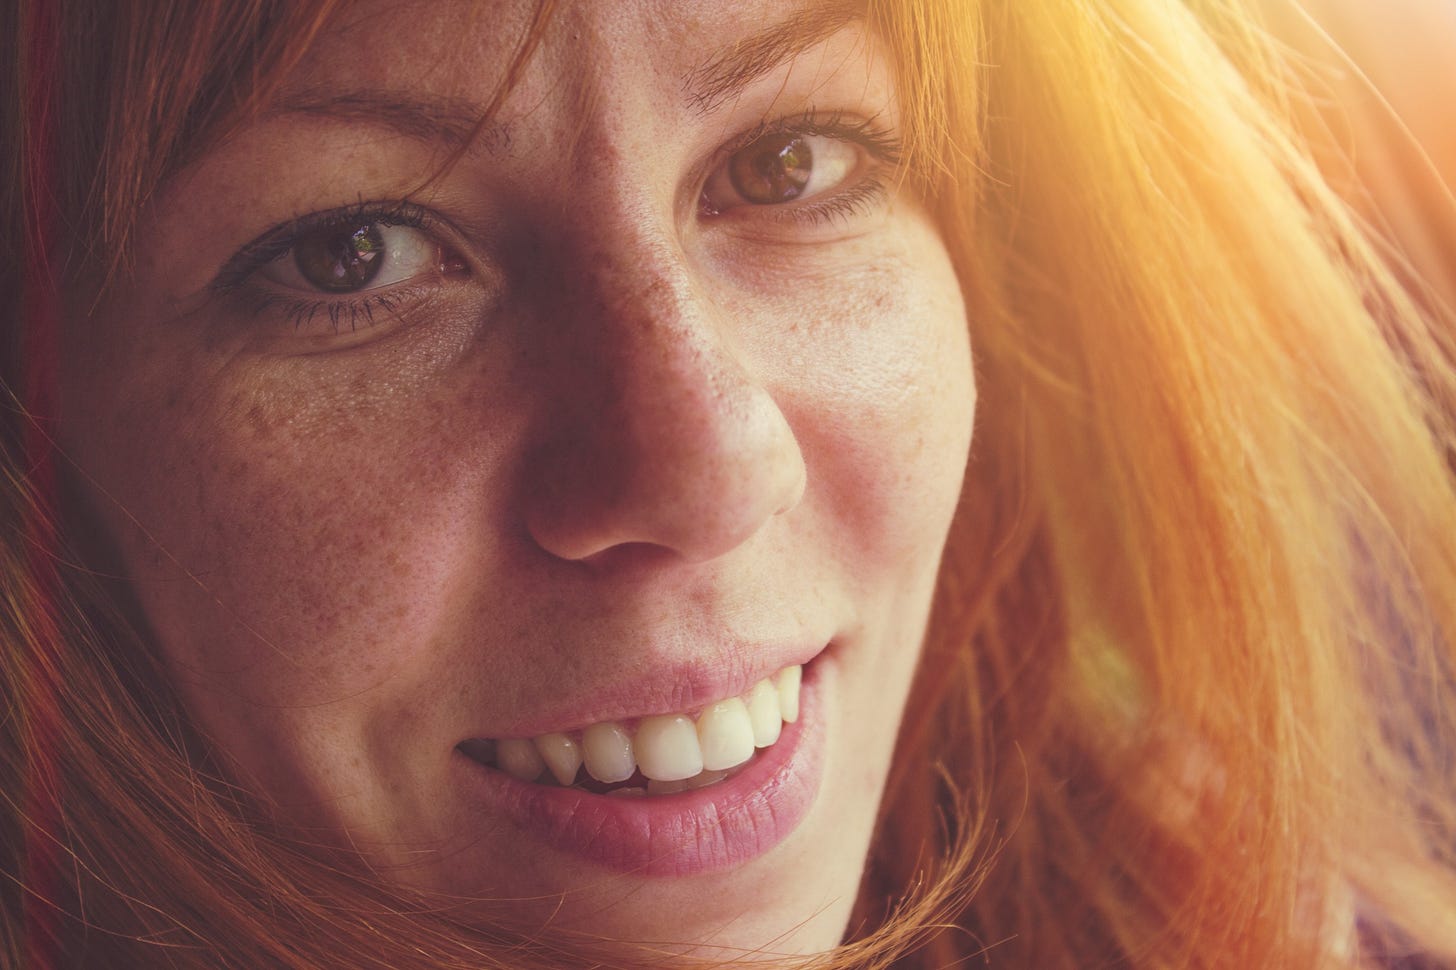 A woman with red hair and brown eyes smiles closely into the camera.